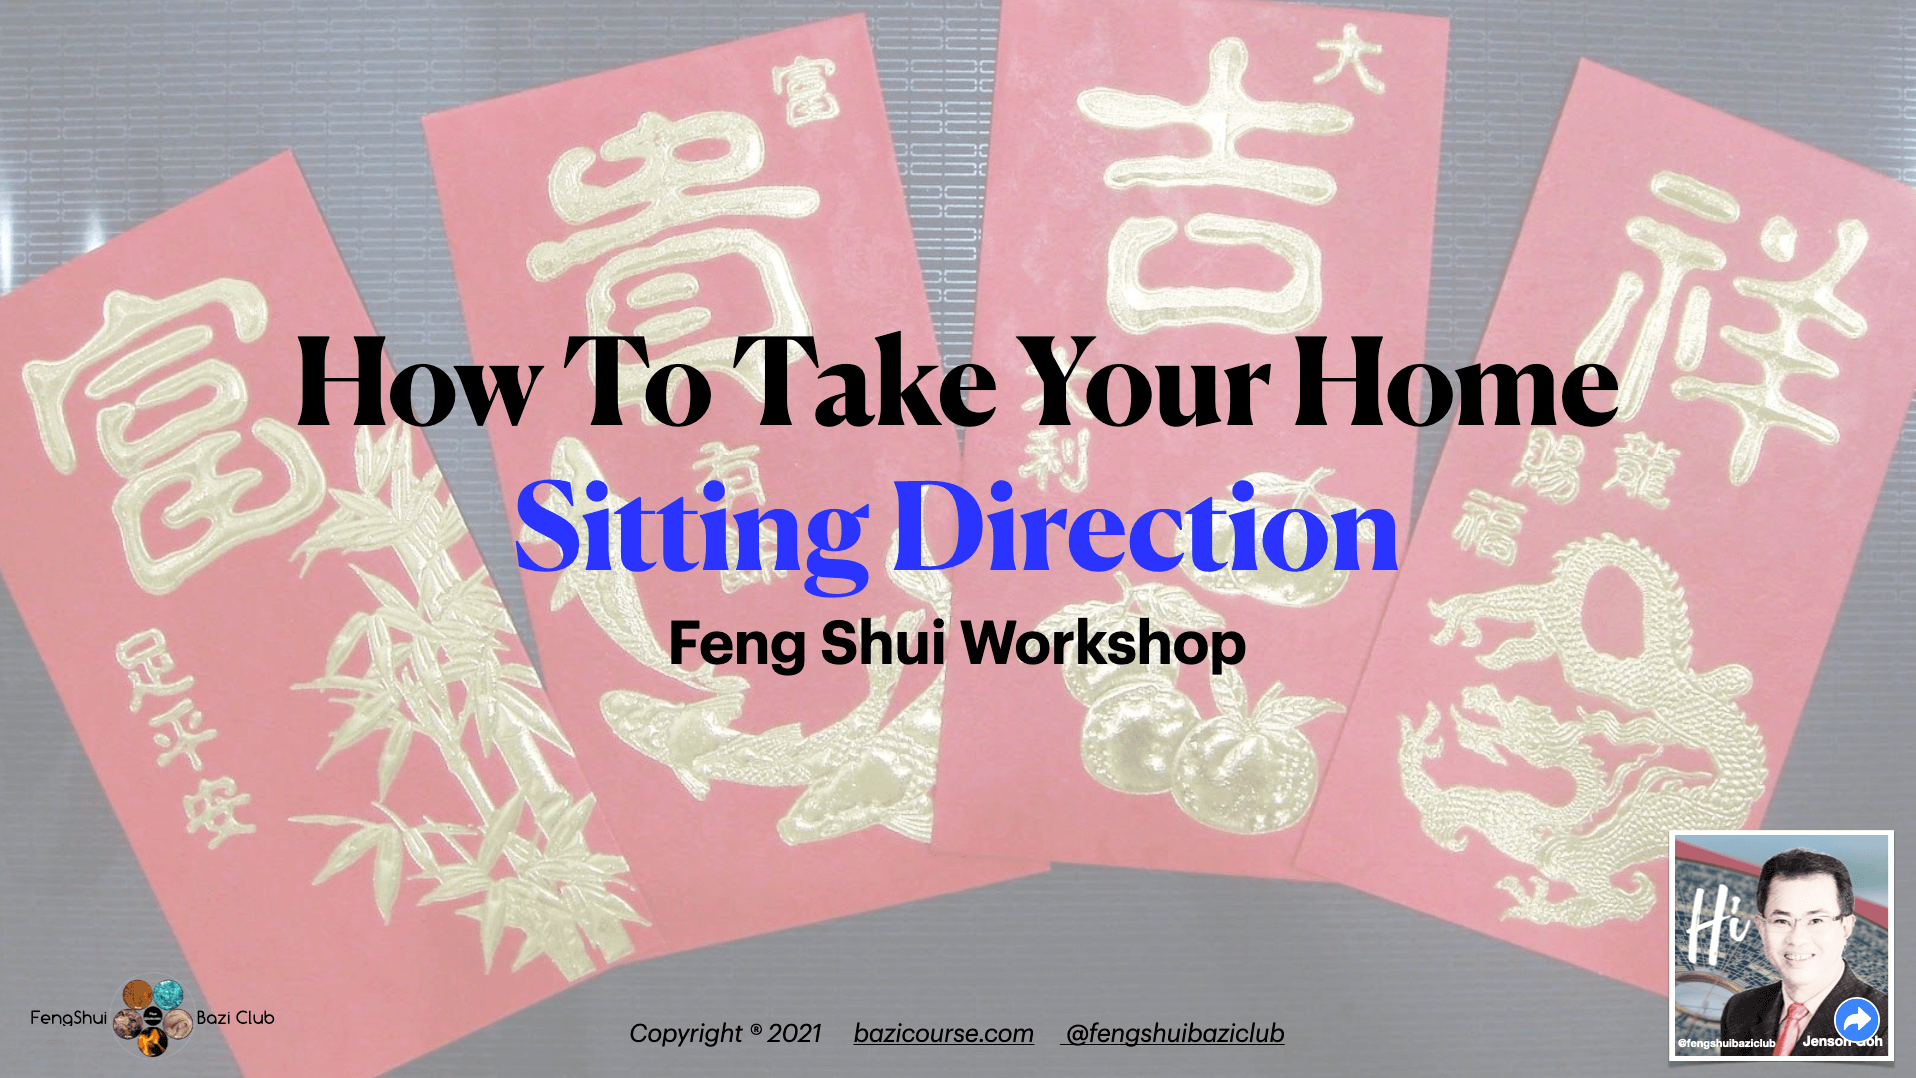 Feng Shui Facing and sitting direction